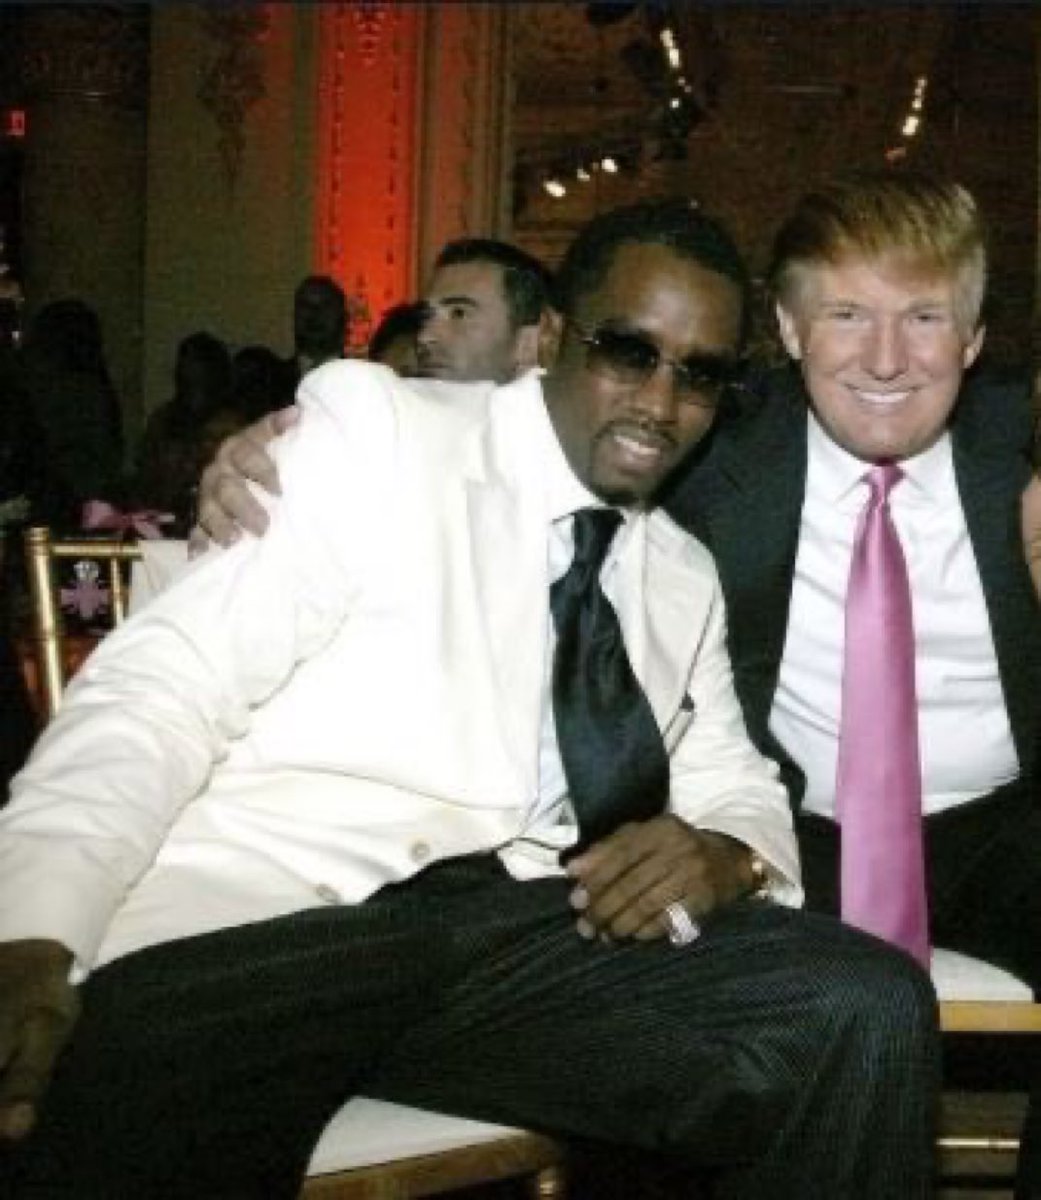 BREAKING: Trump is Trying to ban This Photo of him with Diddy from social media And Google. Trump insiders say, 'Trump hates This photo.'